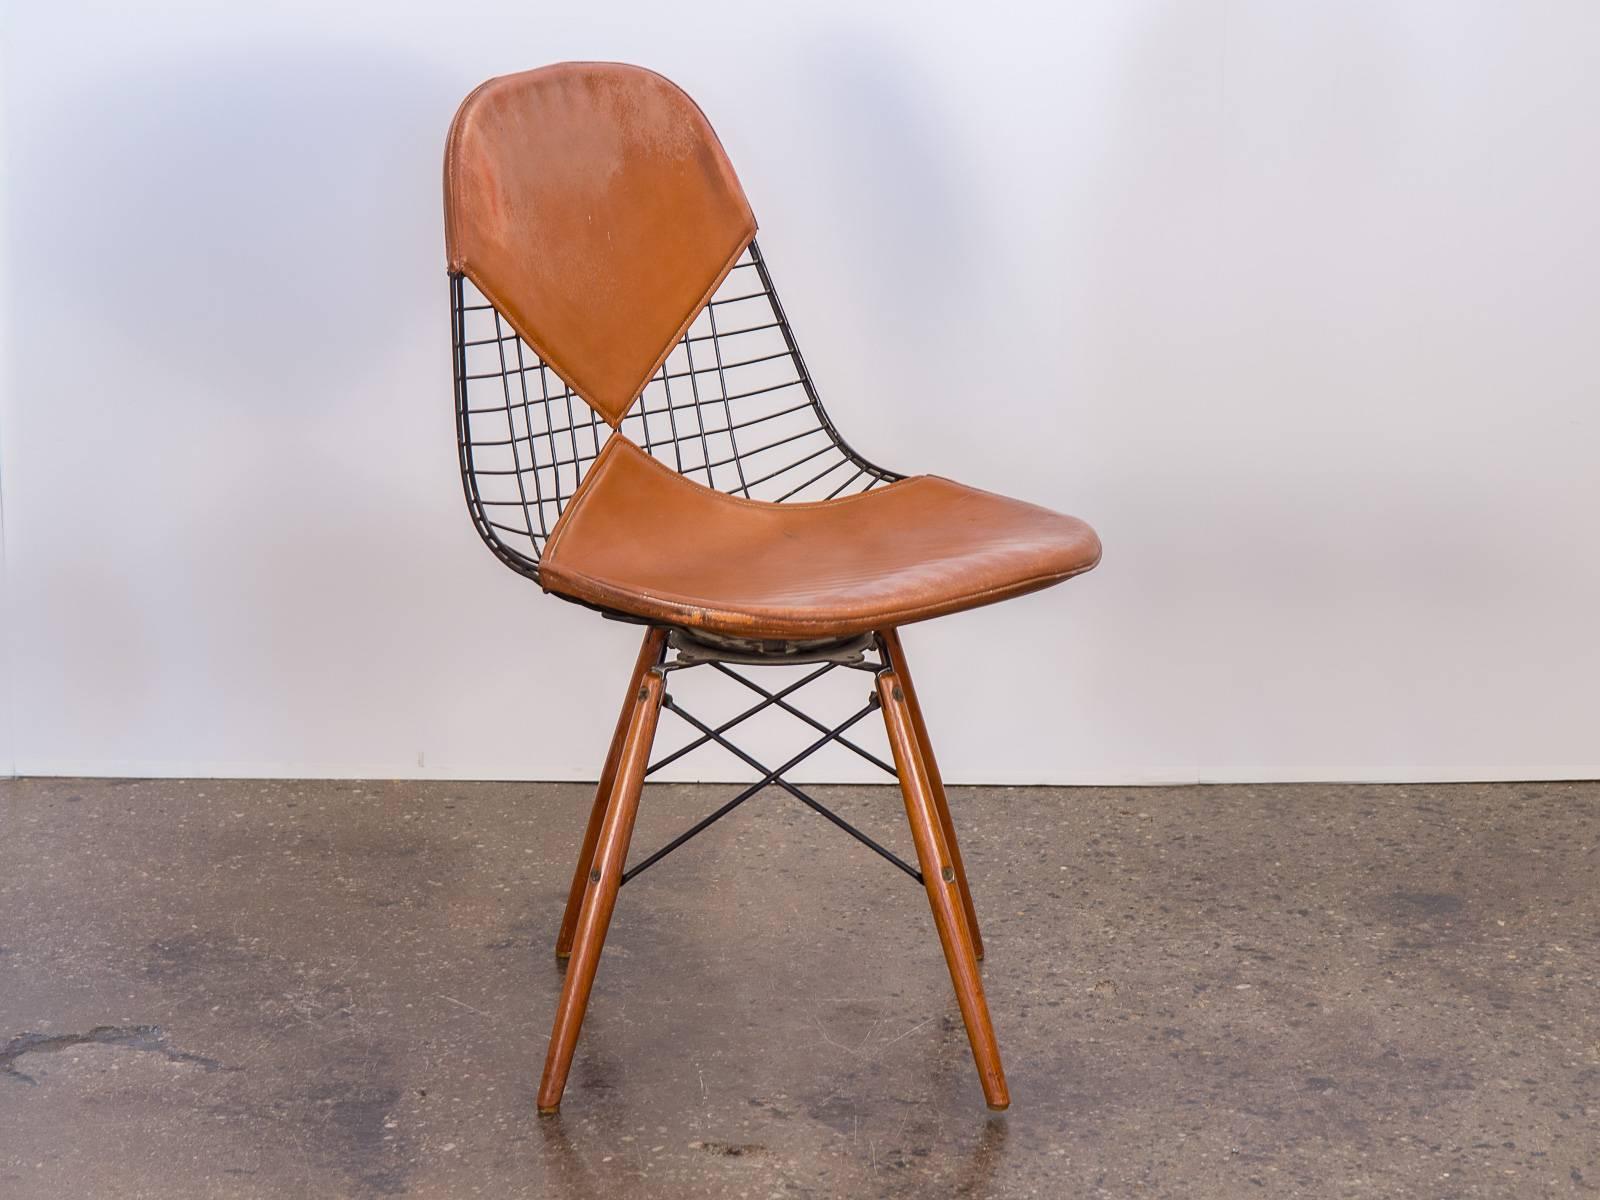 Scarce, original, 1950s Eames PKW2 wire chair on walnut dowel swivel base for Herman Miller. One of the finest Eames PKW2 chairs we have had at OAM. Bikini leather patina is beautiful, lined woven fabric is not dried out or brittle but is soft and